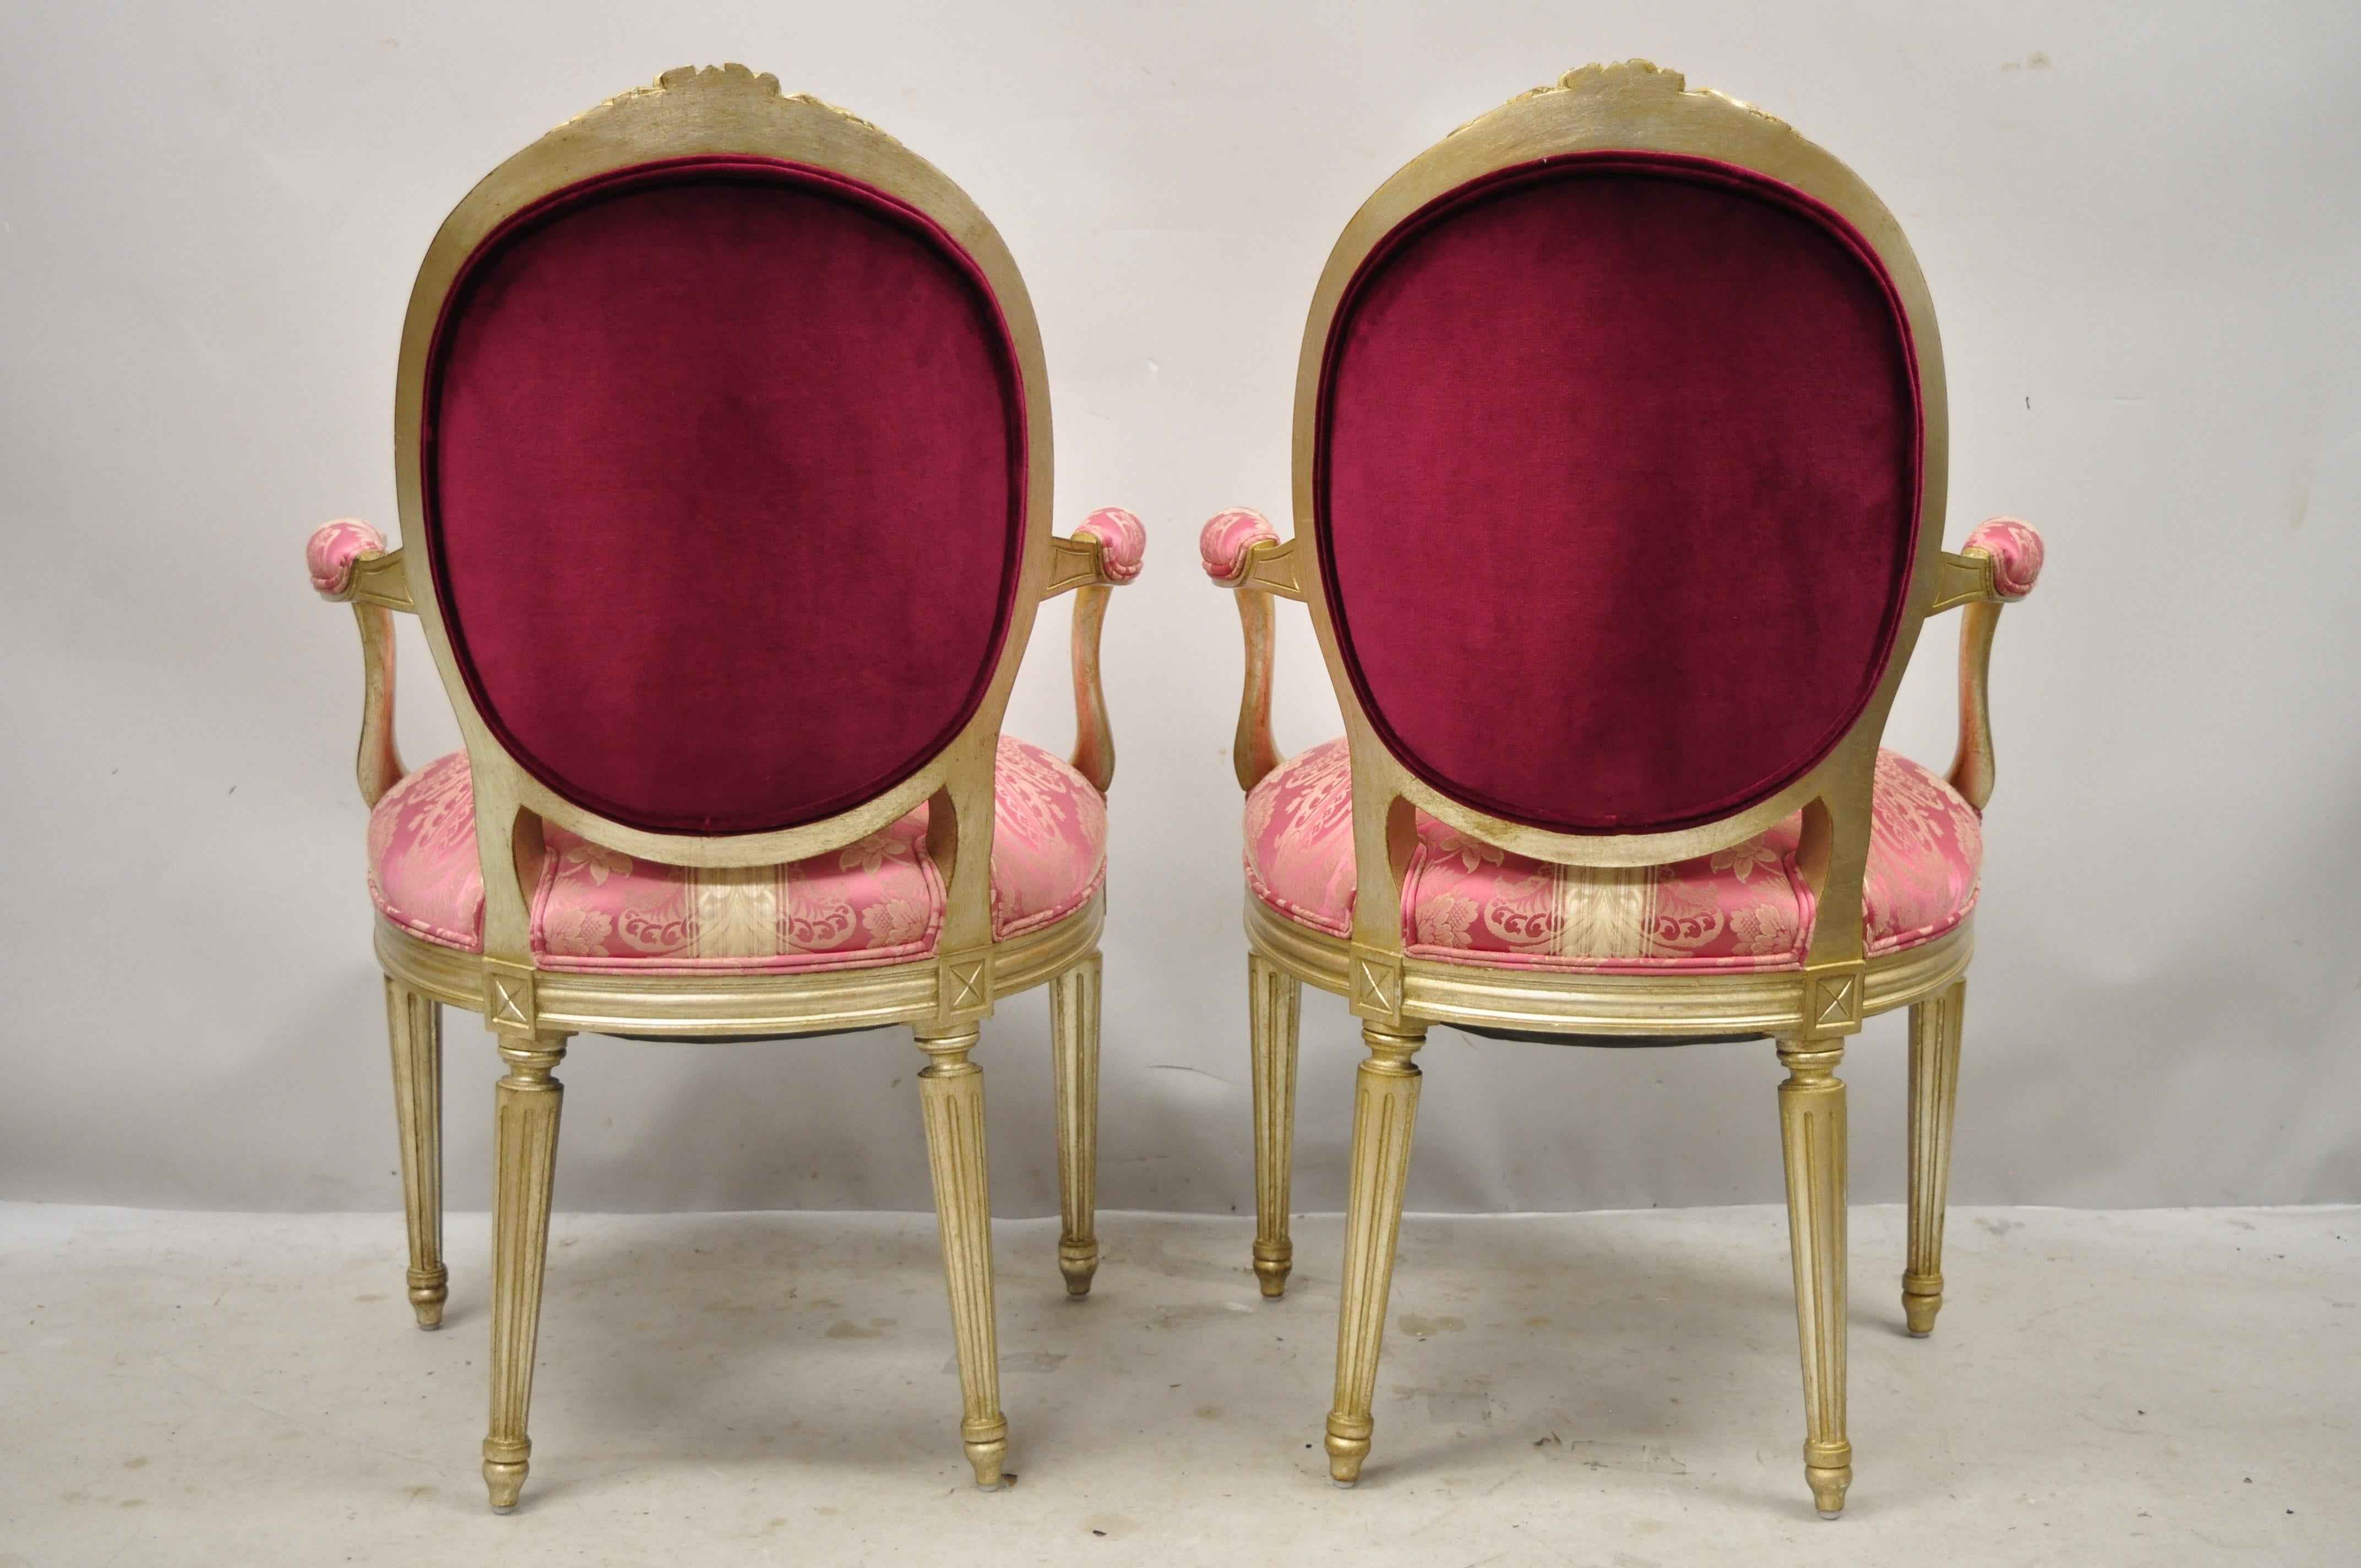 French Louis XVI Style Silver Gold Gilt Pink Damask Oval Back Arm Chairs, Pair For Sale 3